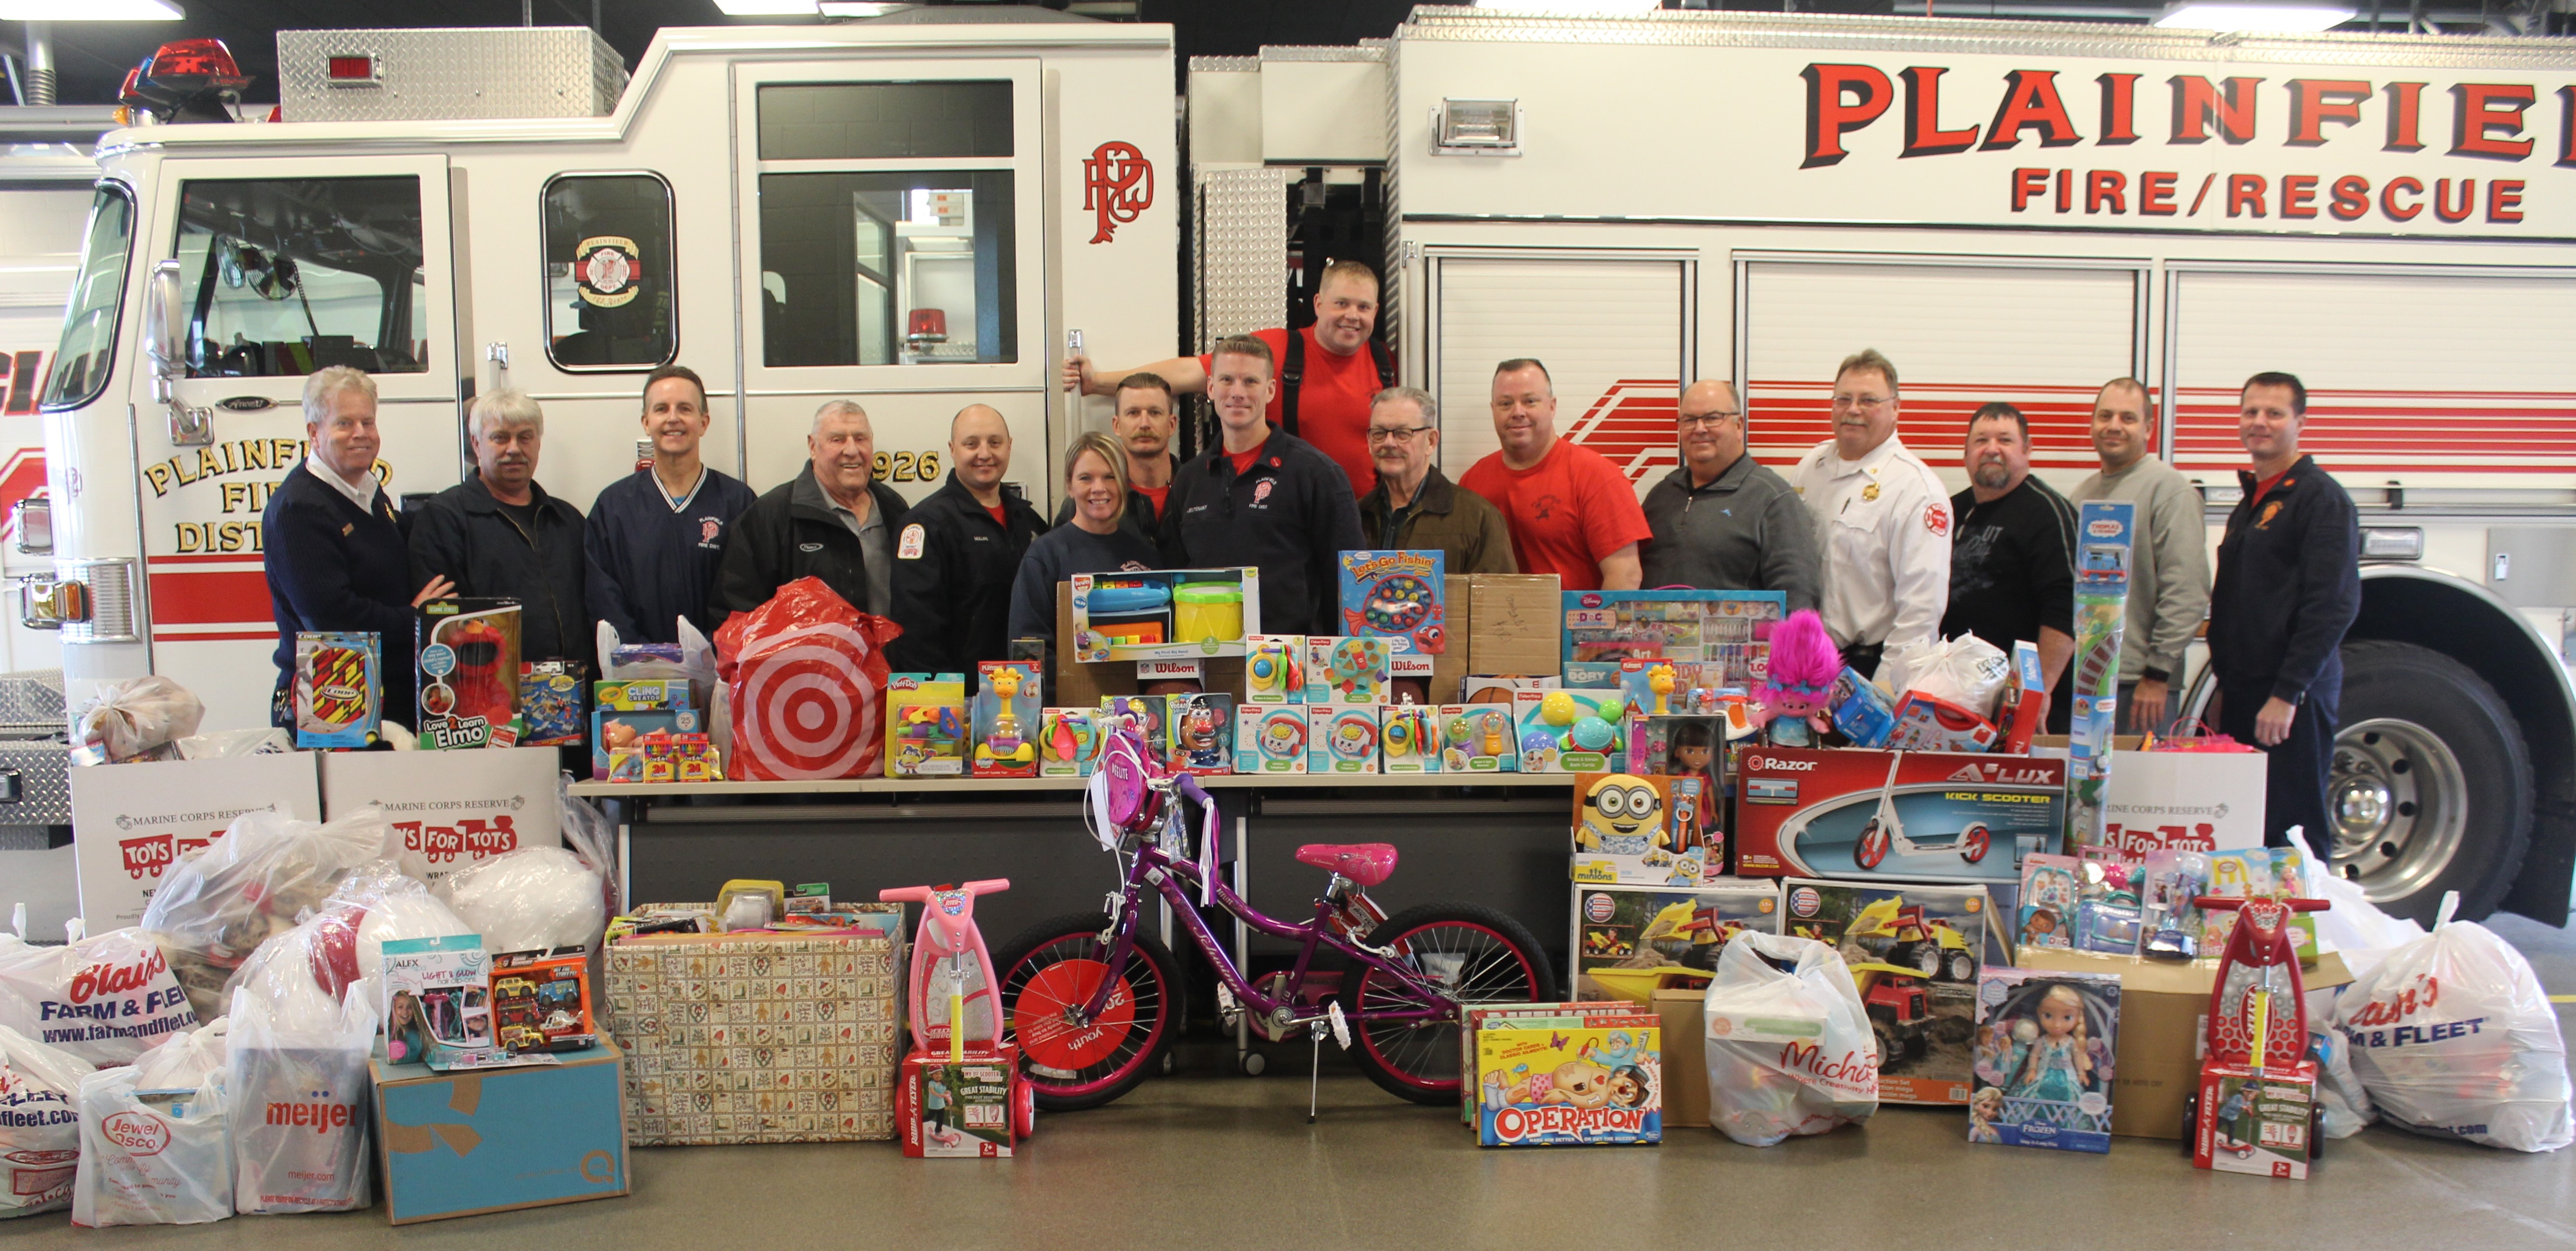 PFPD with donations